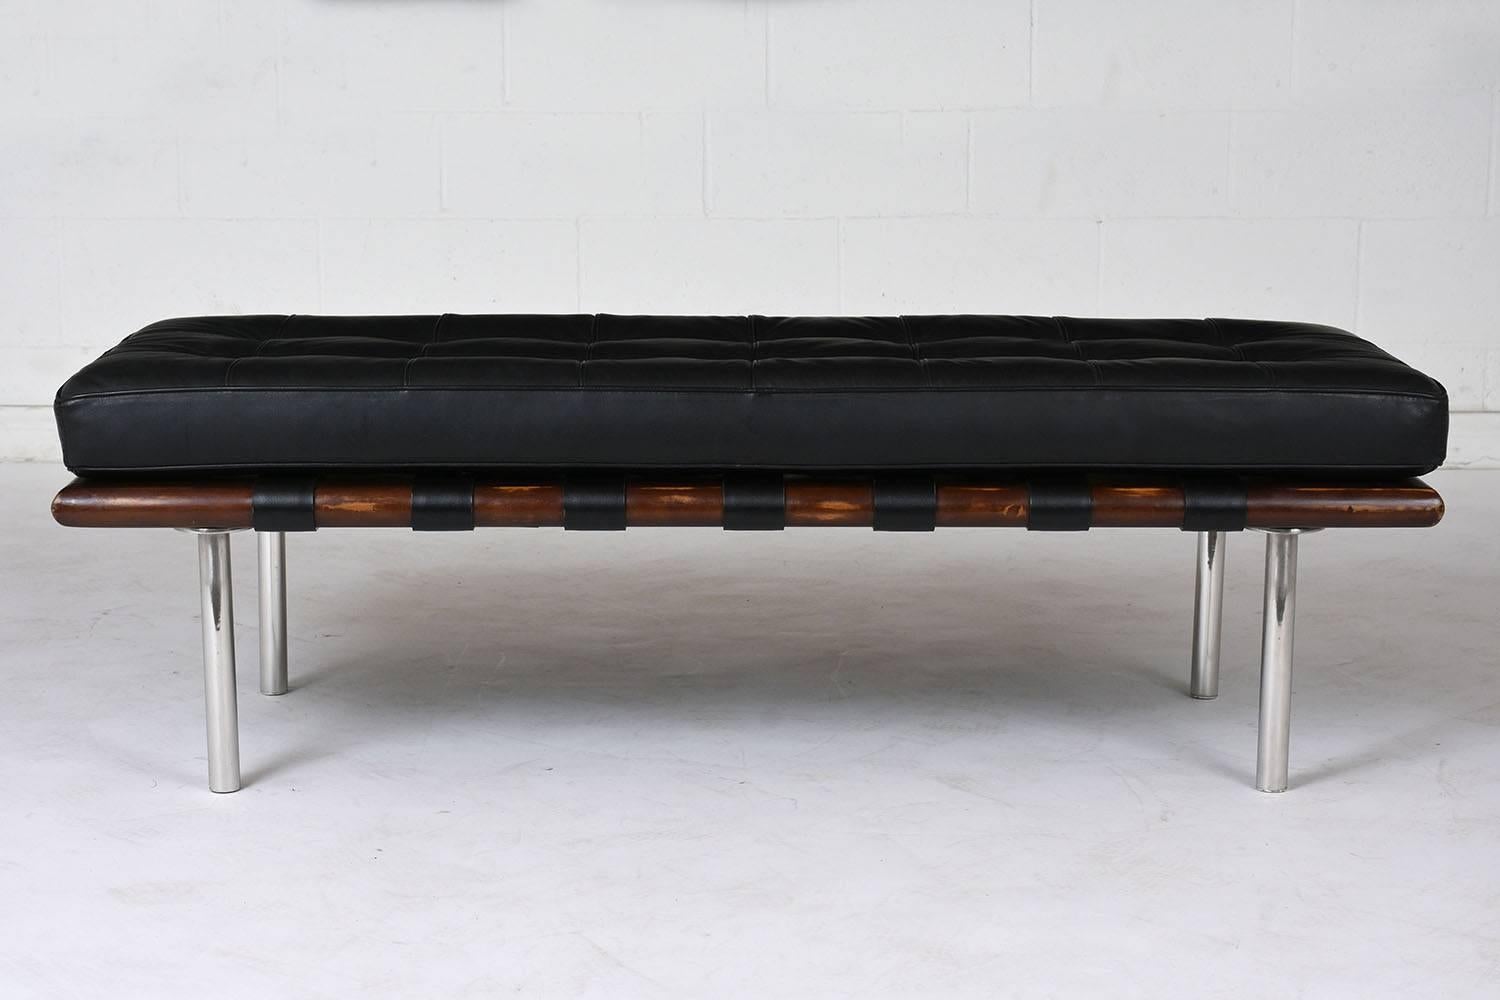 This 2000s Mid-Century Modern-style bench is made in the manner of Herman Miller. The bench features a wood frame stained in a walnut color with chrome legs. The bench supports its cushion with leather straps wrapped around the width of the bench.